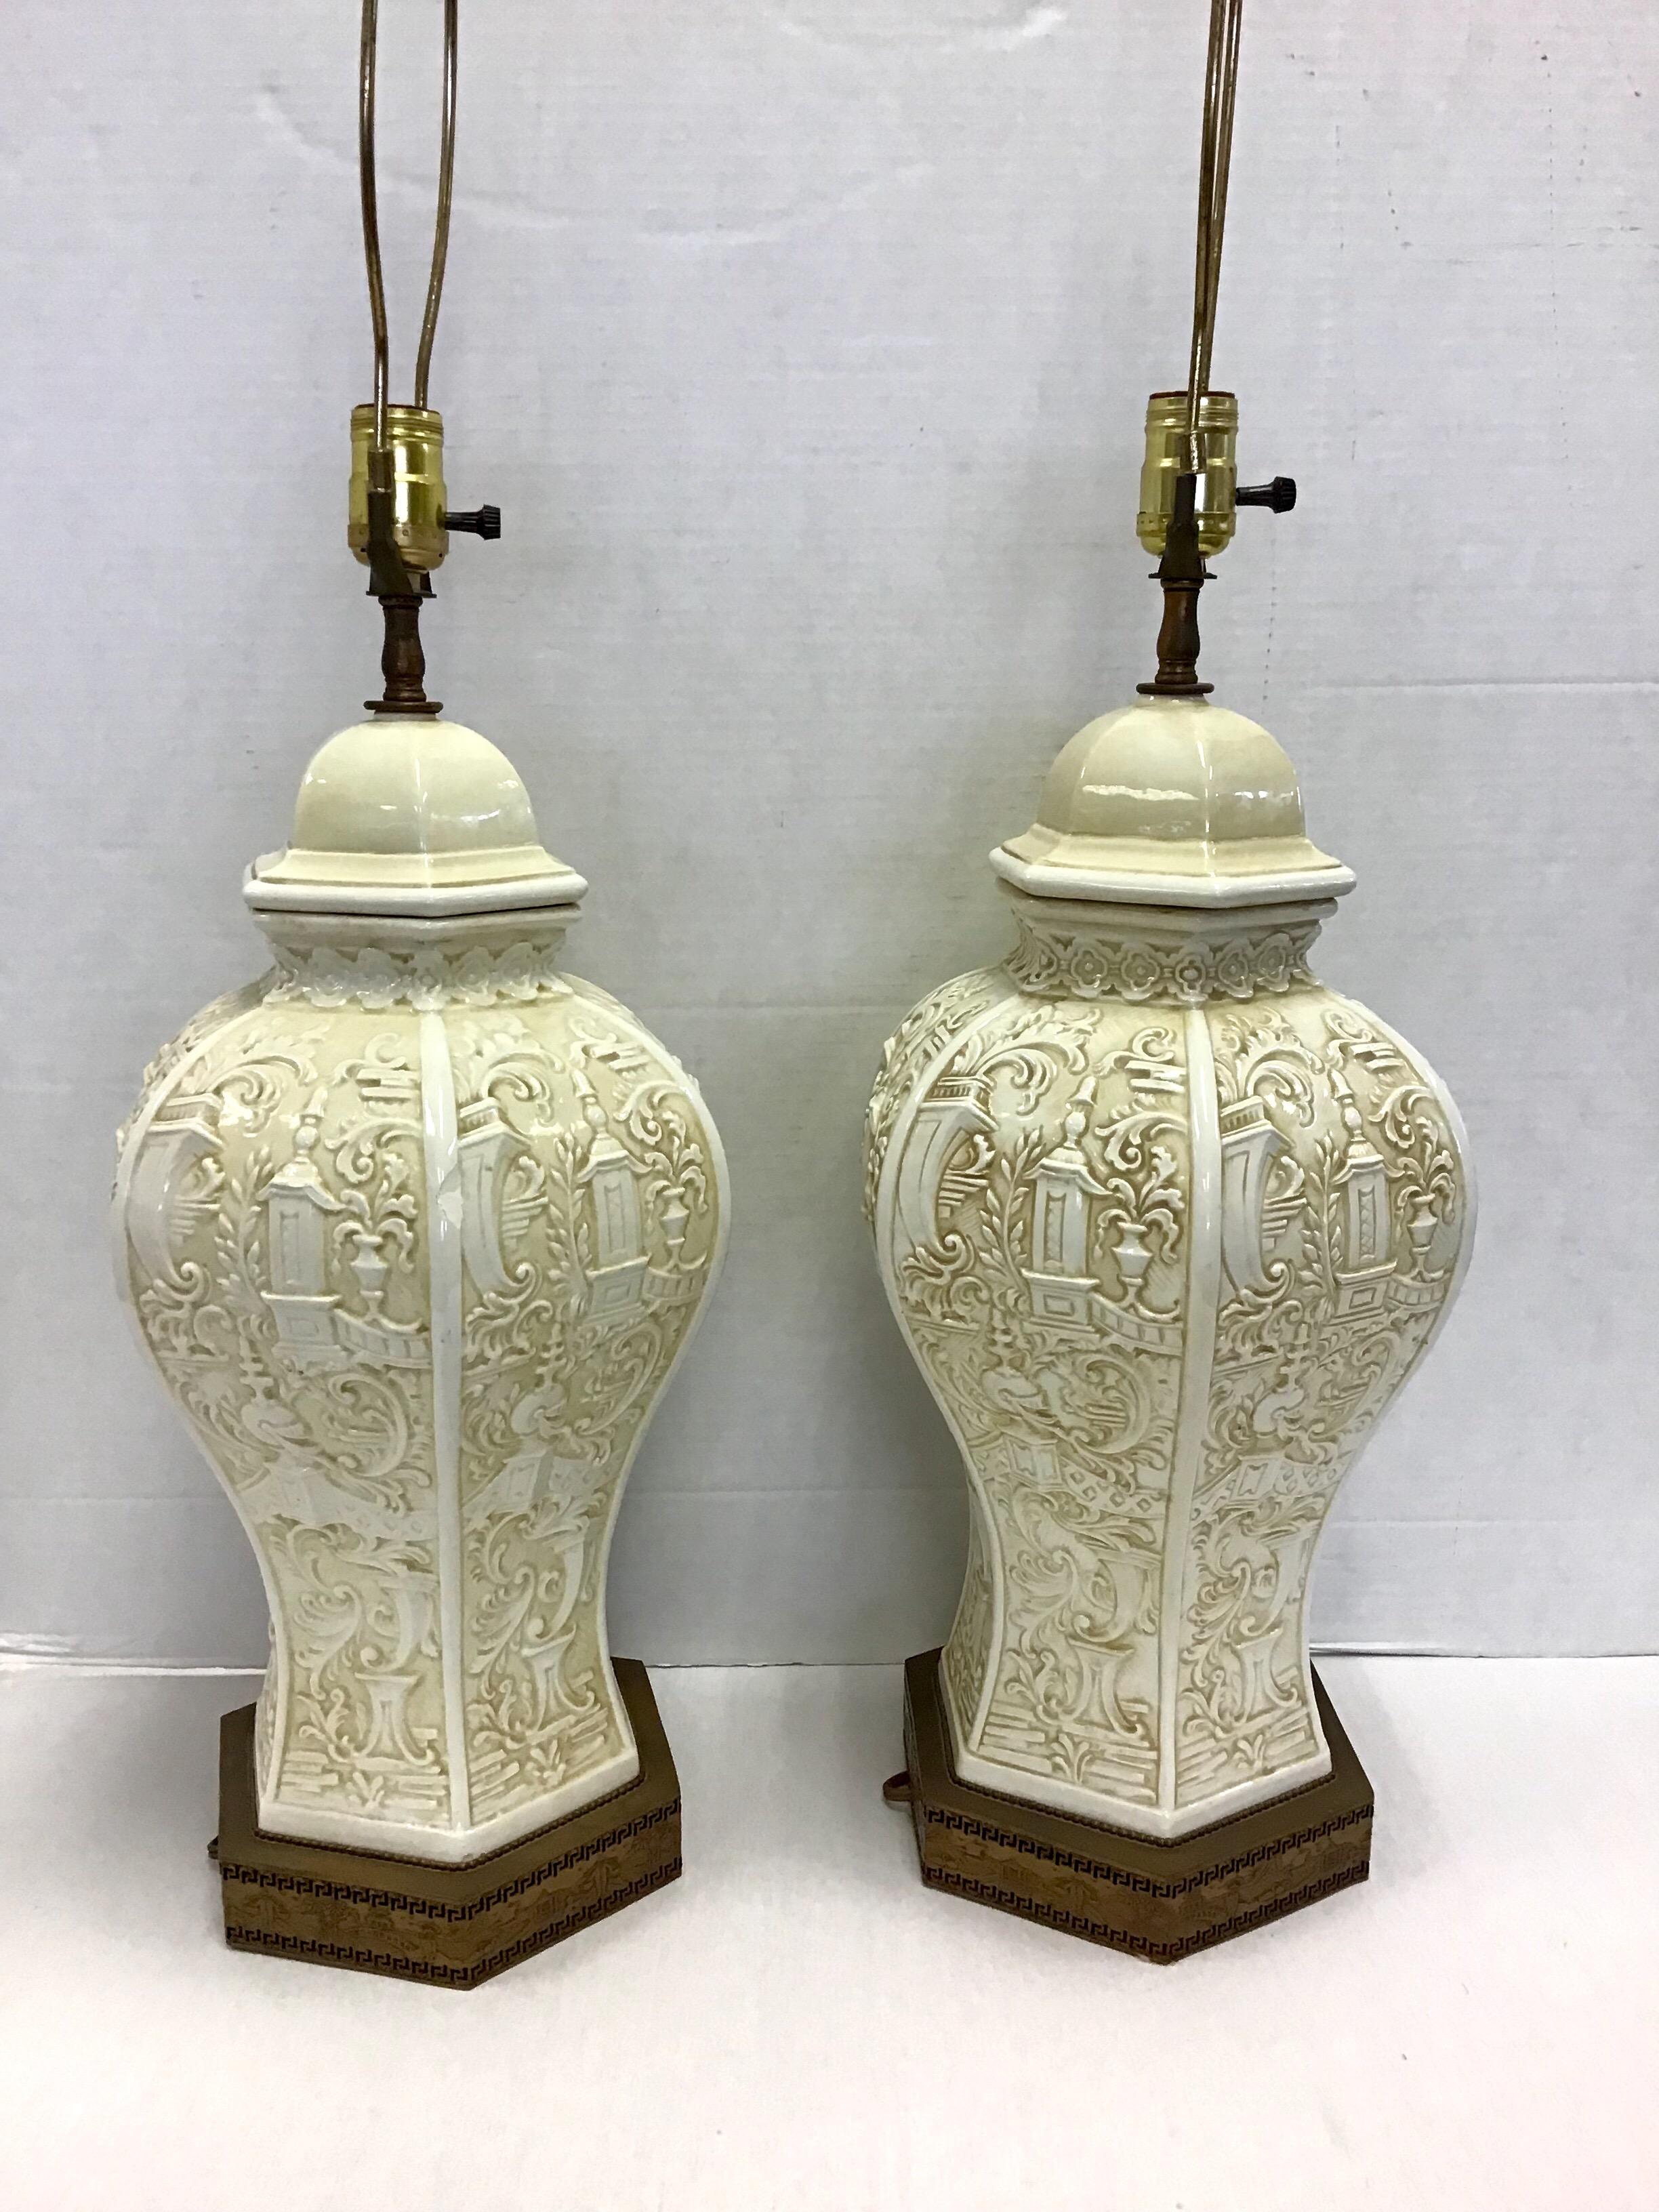 Lovely vintage midcentury pair of Chinese porcelain ginger jar lamps in the palest yellow color. Feature a raised porcelain design of pagodas throughout and a pierced brass base with a relief of a Chinese landscape.
Condition is excellent except for